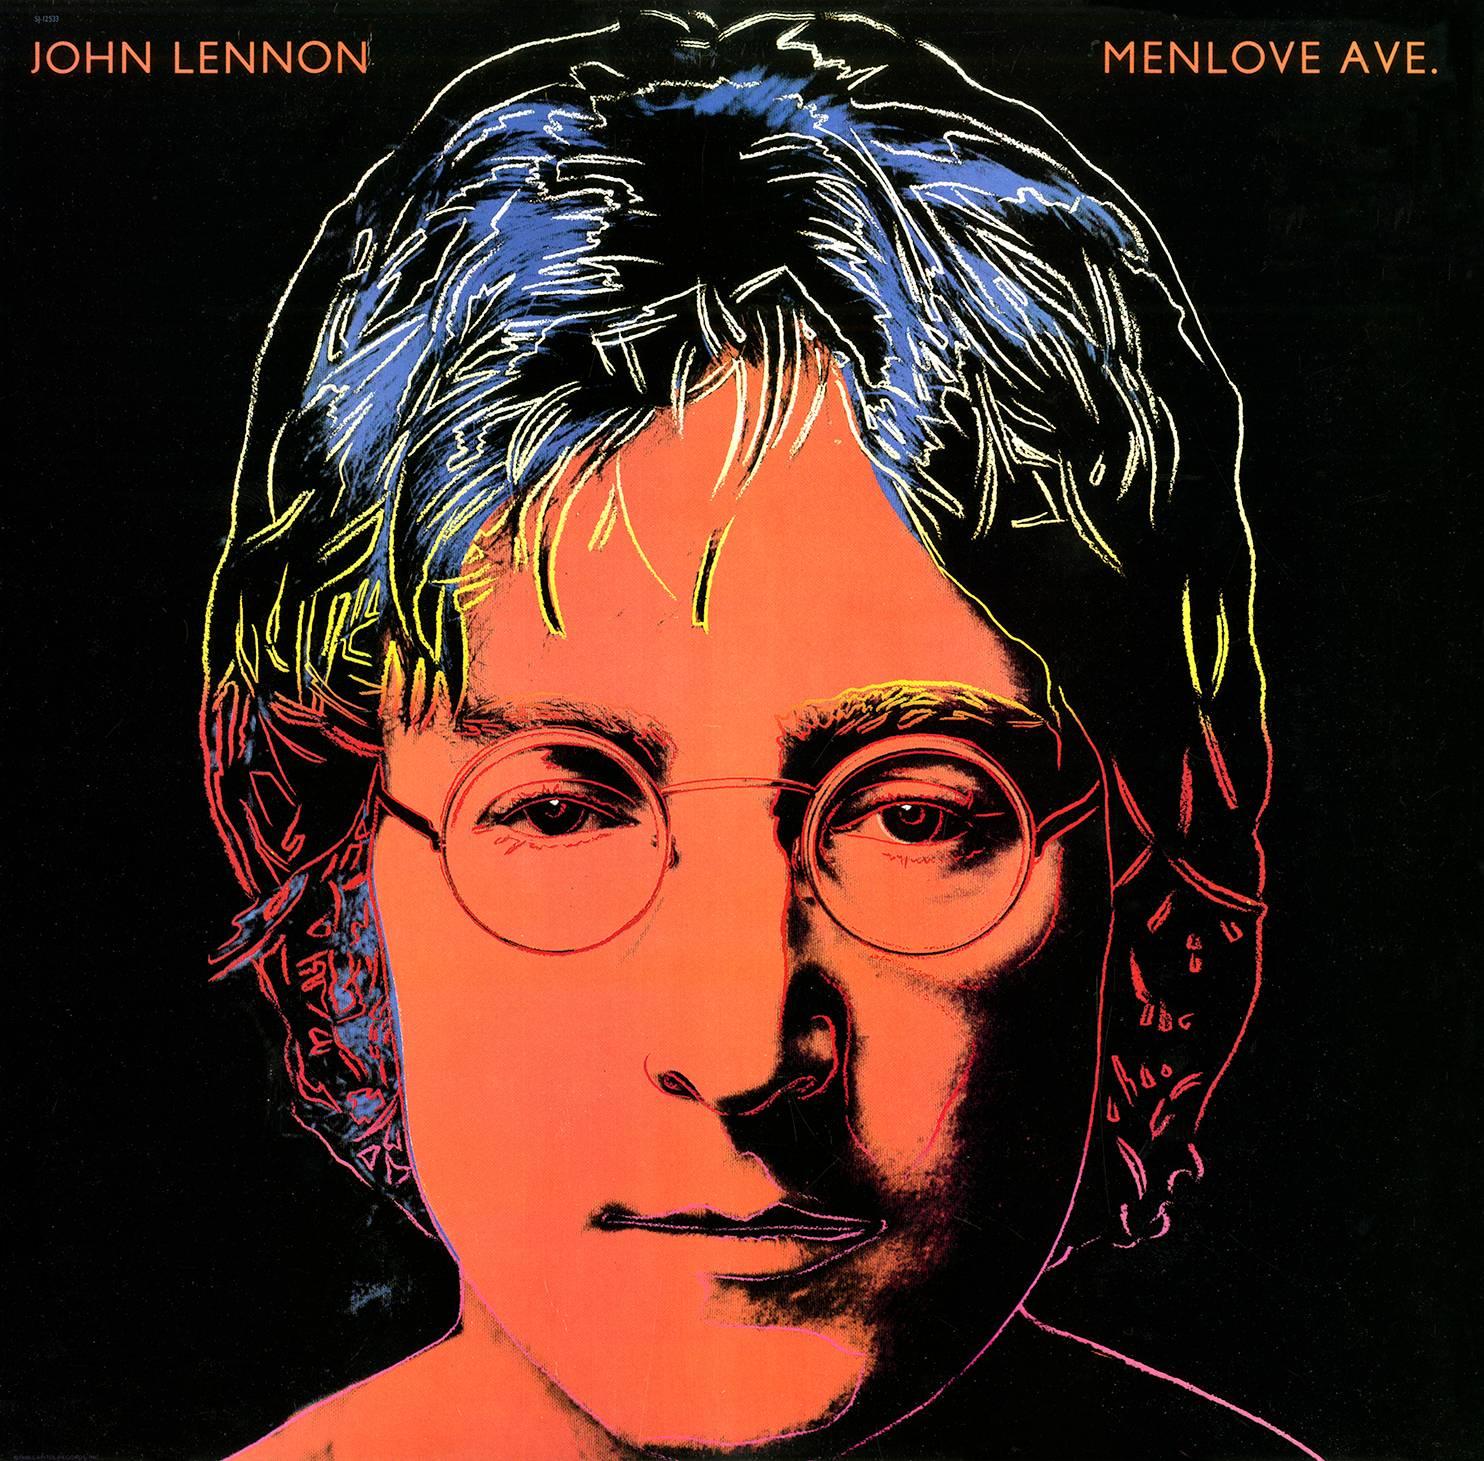 Andy Warhol John Lennon 1986:
Rare sought-after Andy Warhol John Lennon Record Cover Art:
Offset illustrated by Andy Warhol shortly before his death in 1986 for the estate of John Lennon/Capital Records. Literature/references: Andy Warhol: The